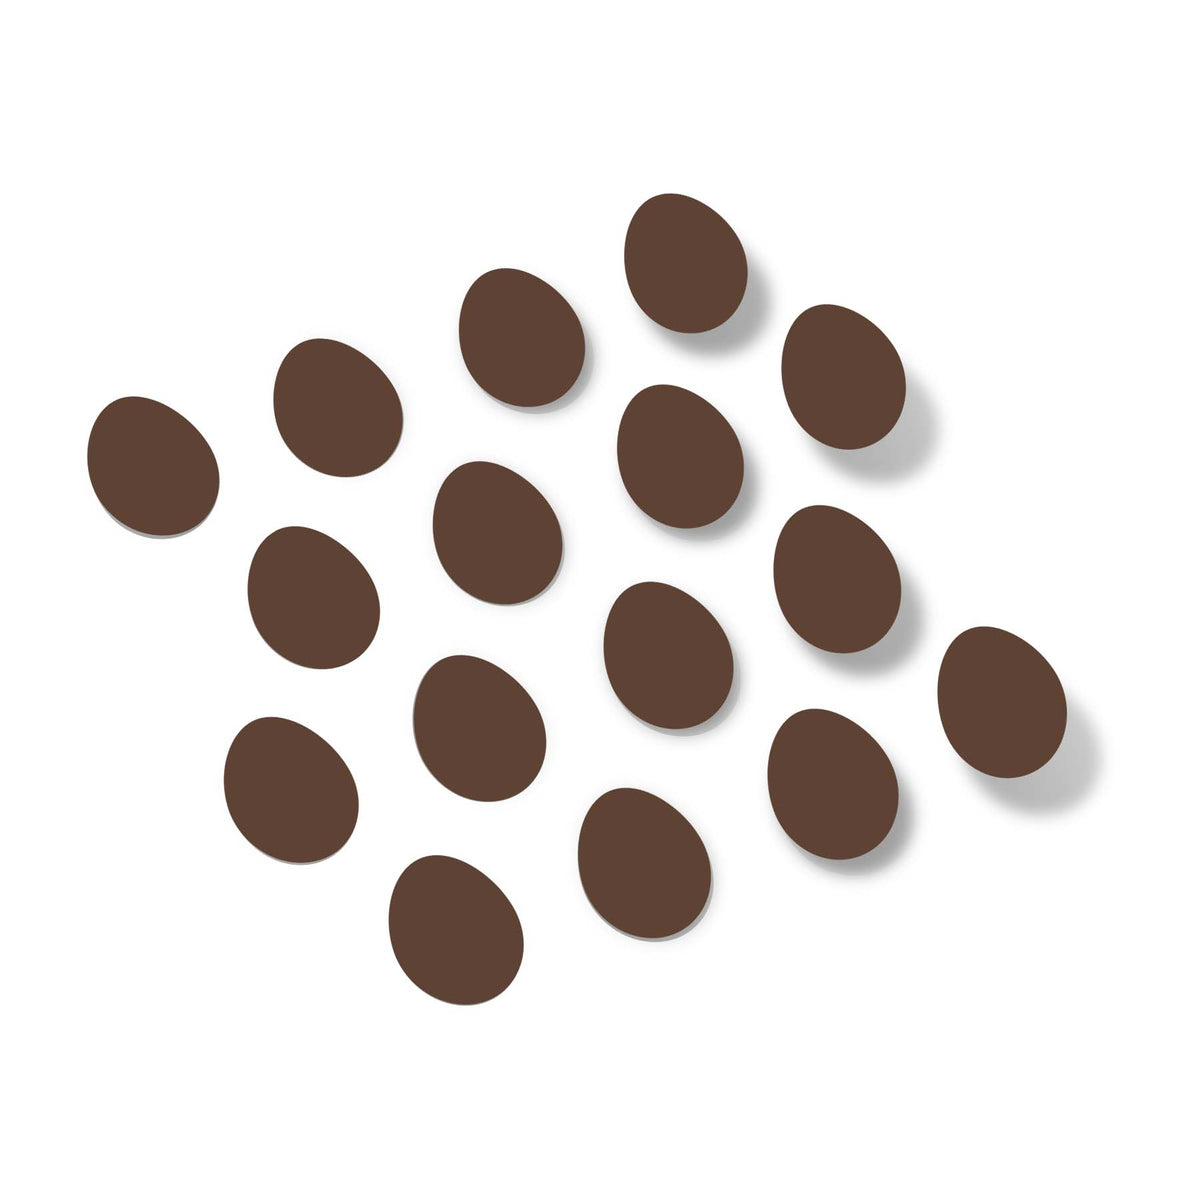 Chocolate Brown Egg Shape Vinyl Wall Decals